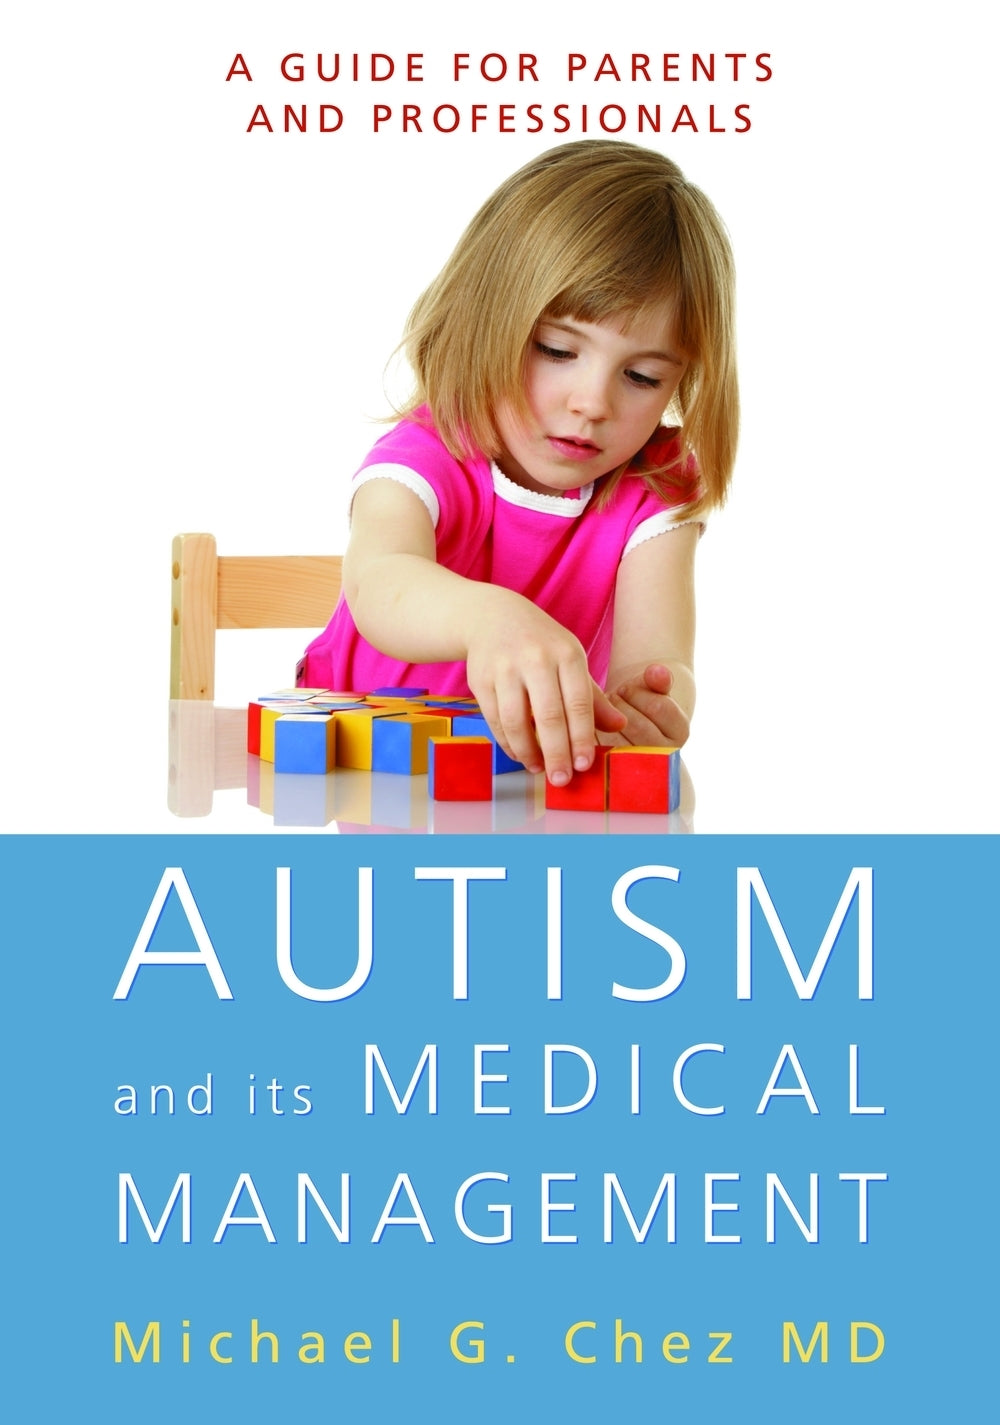 Autism and its Medical Management by Michael Chez